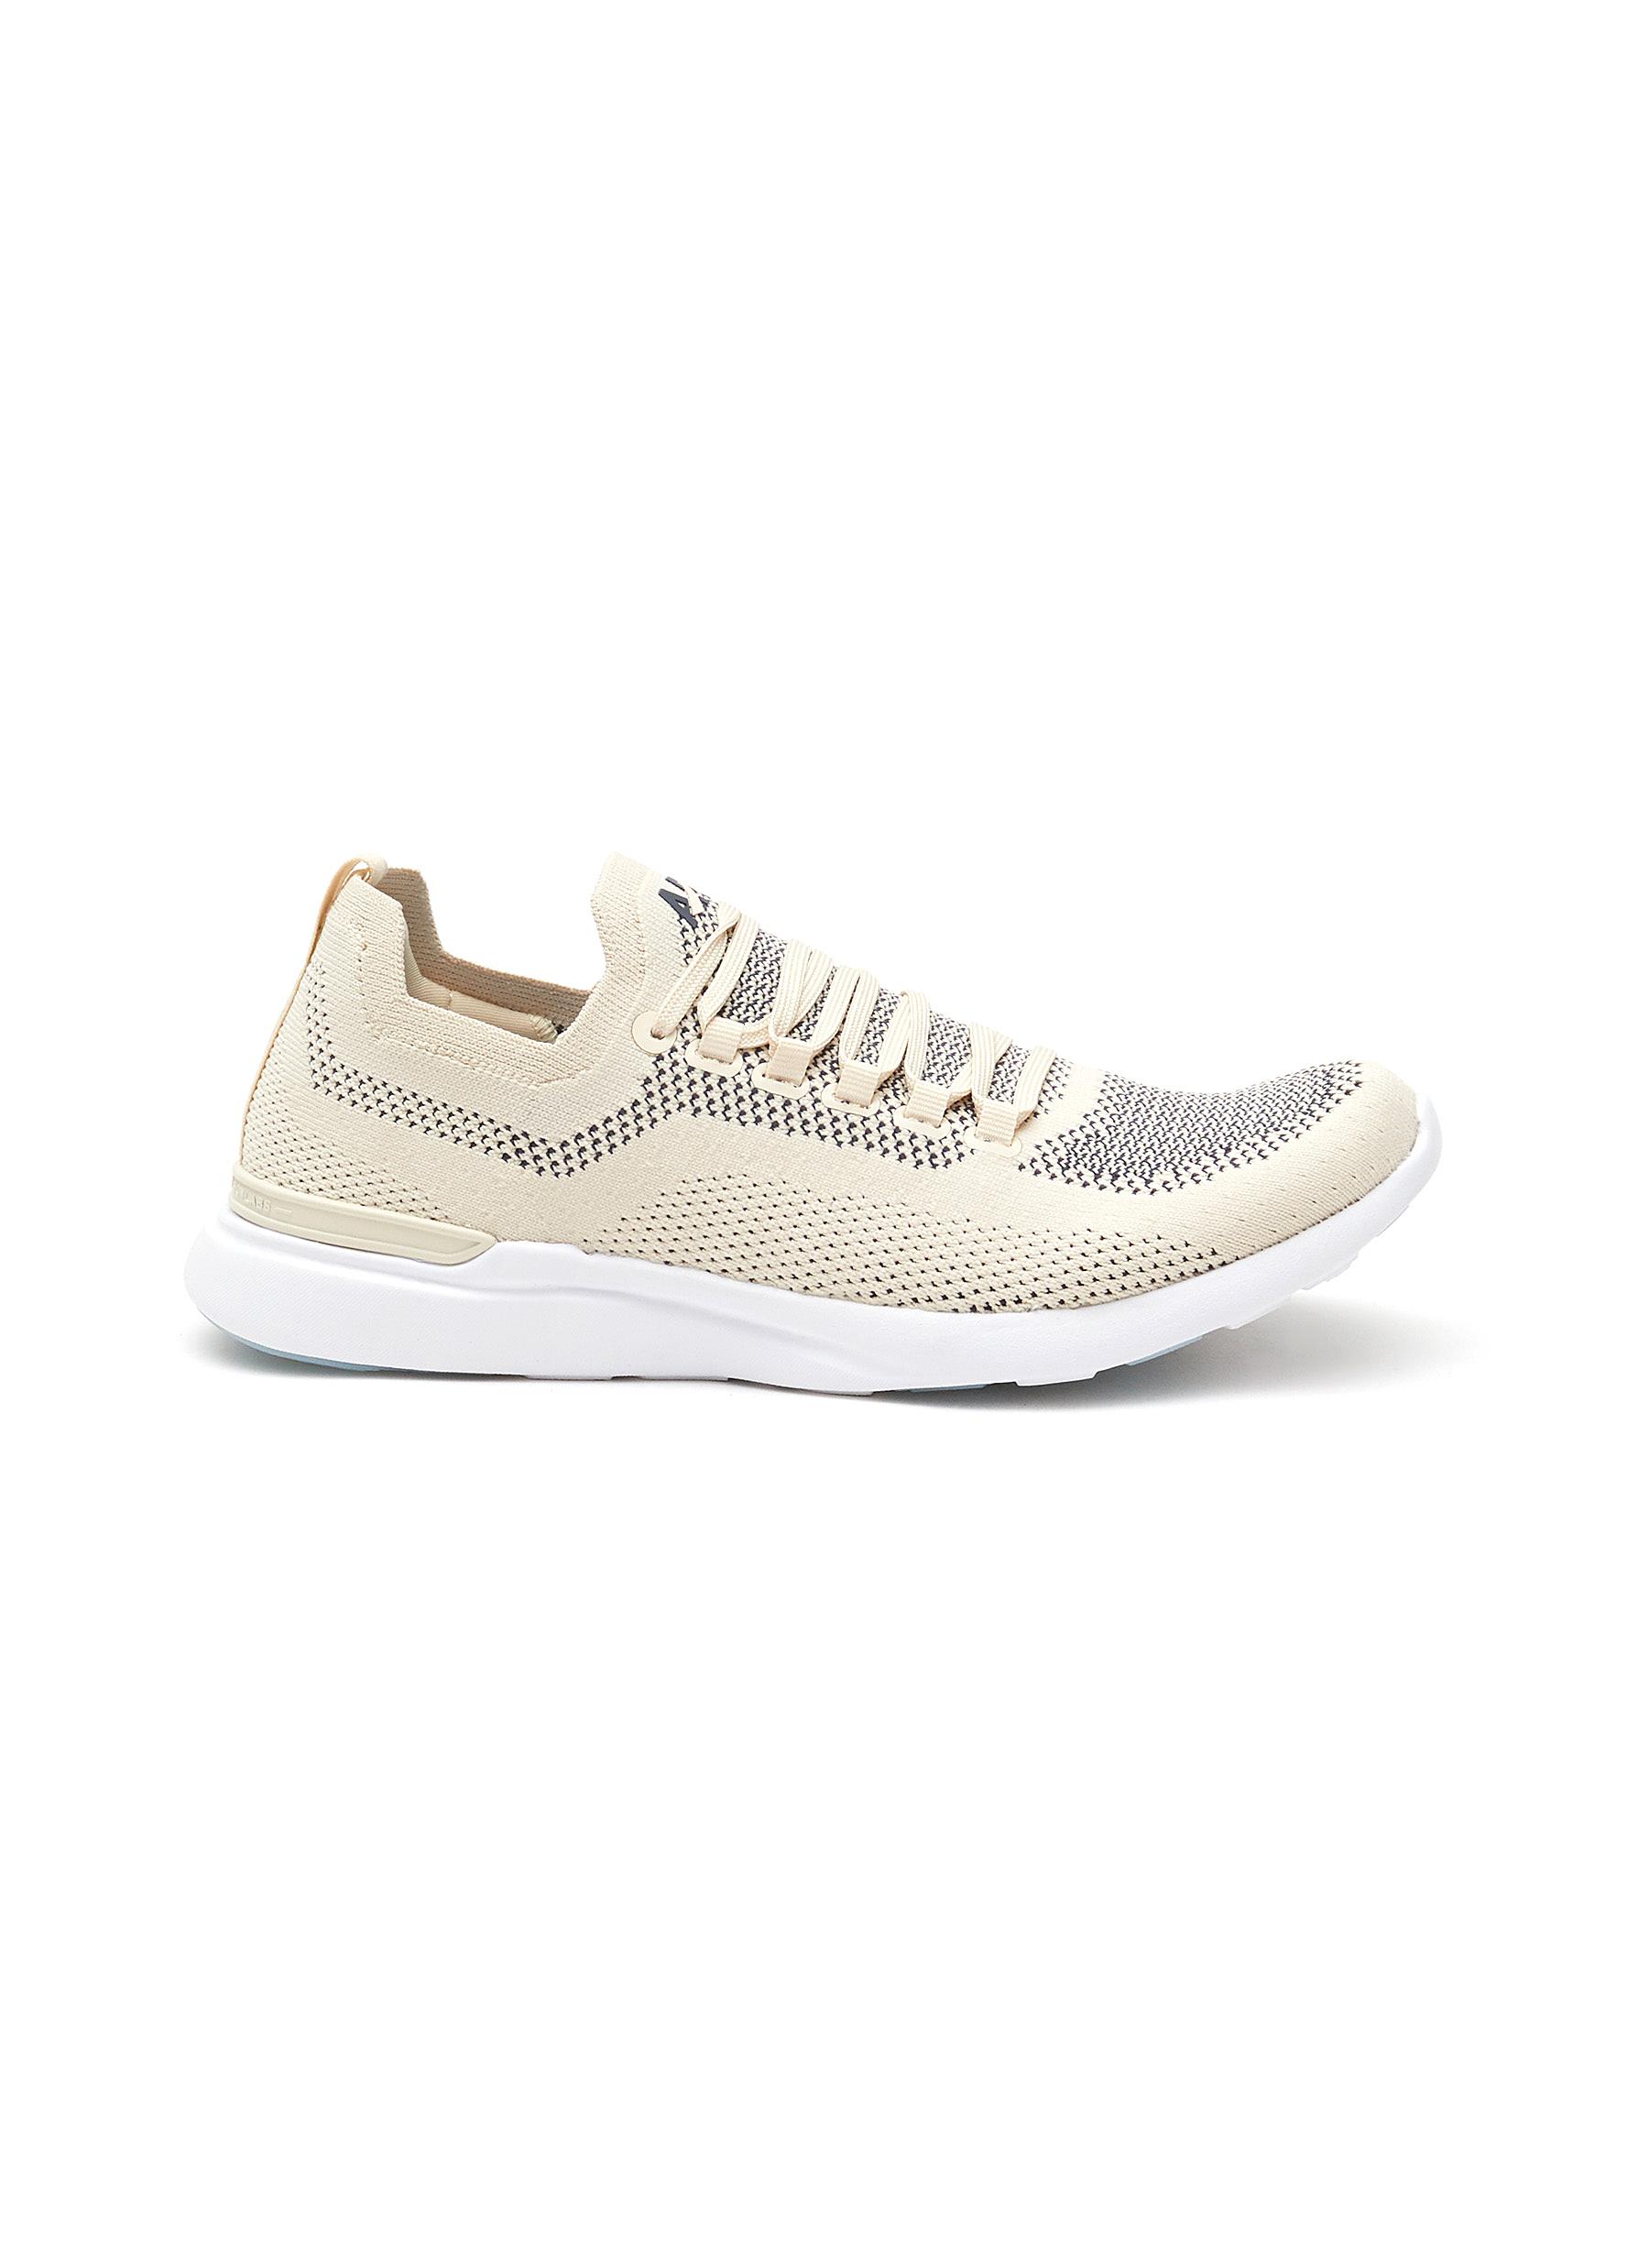 ATHLETIC PROPULSION LABS ‘TECHLOOM BREEZE' LOW TOP LACE UP SNEAKERS